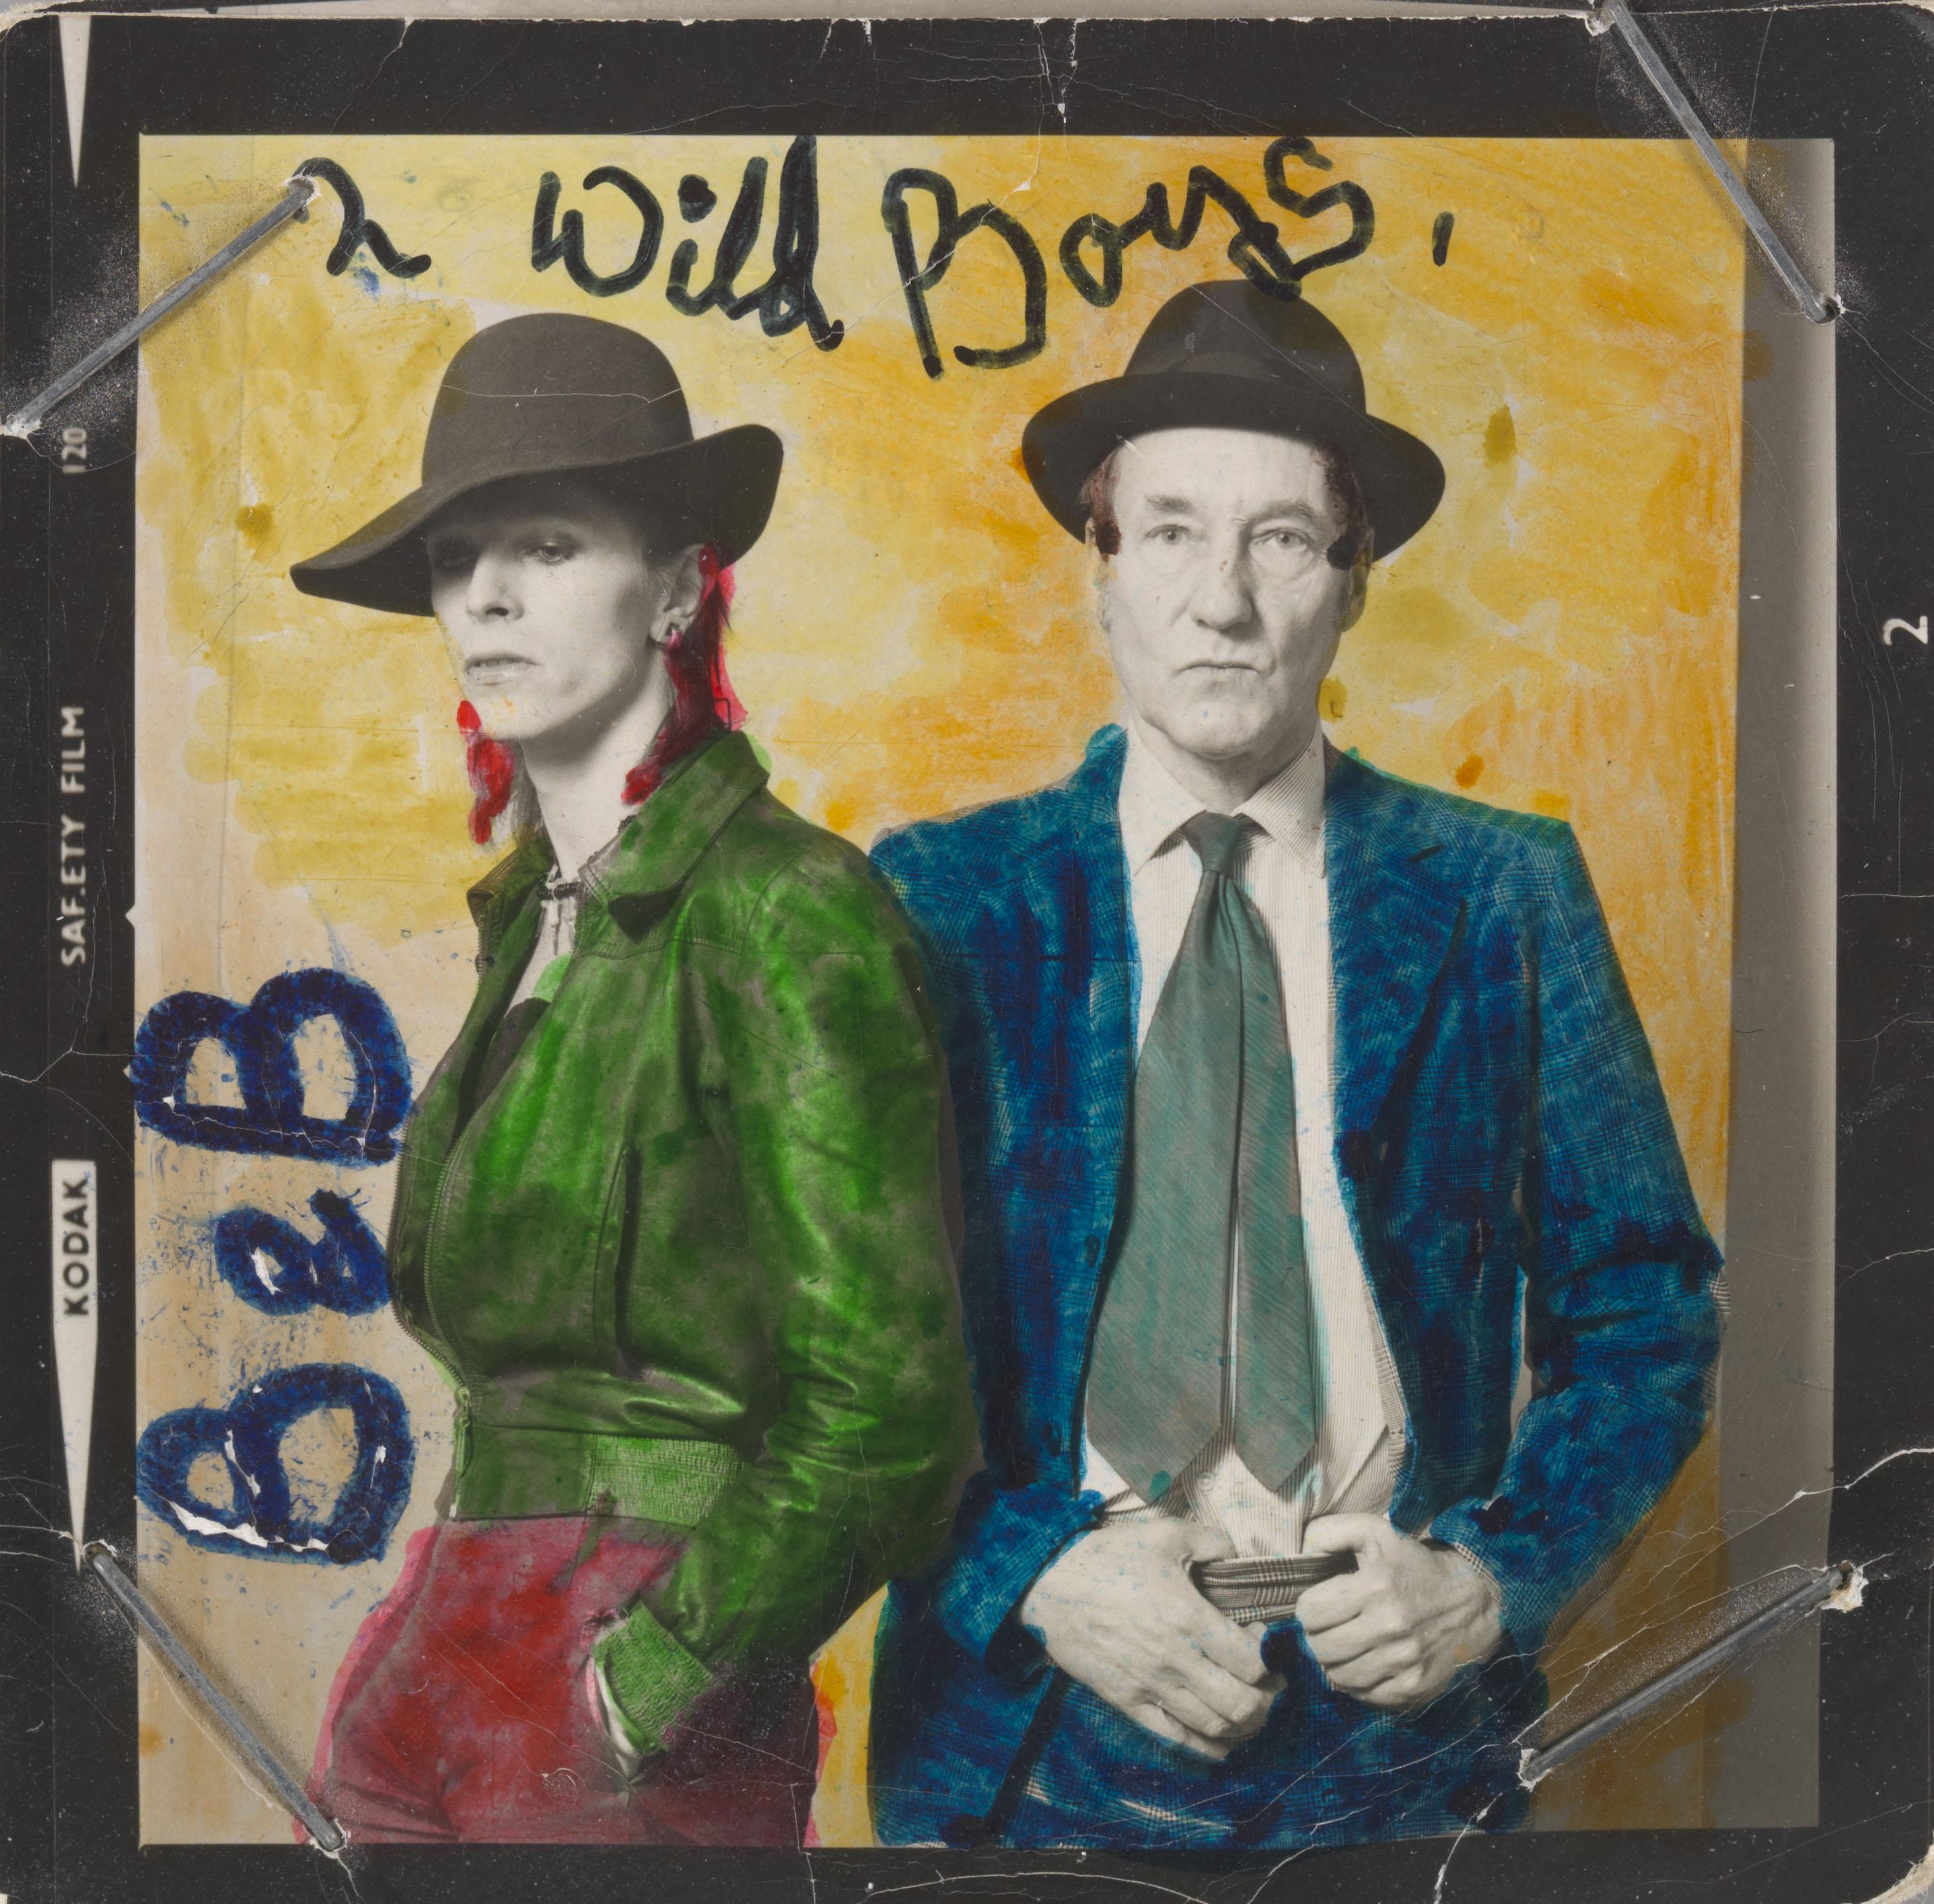 Black and white portrait of David Bowie and William Burroughs with the background and their clothes drawn in bright colors."B & B" is handwritten to the left of Bowie, and "2 Wild Boys," written above their heads.